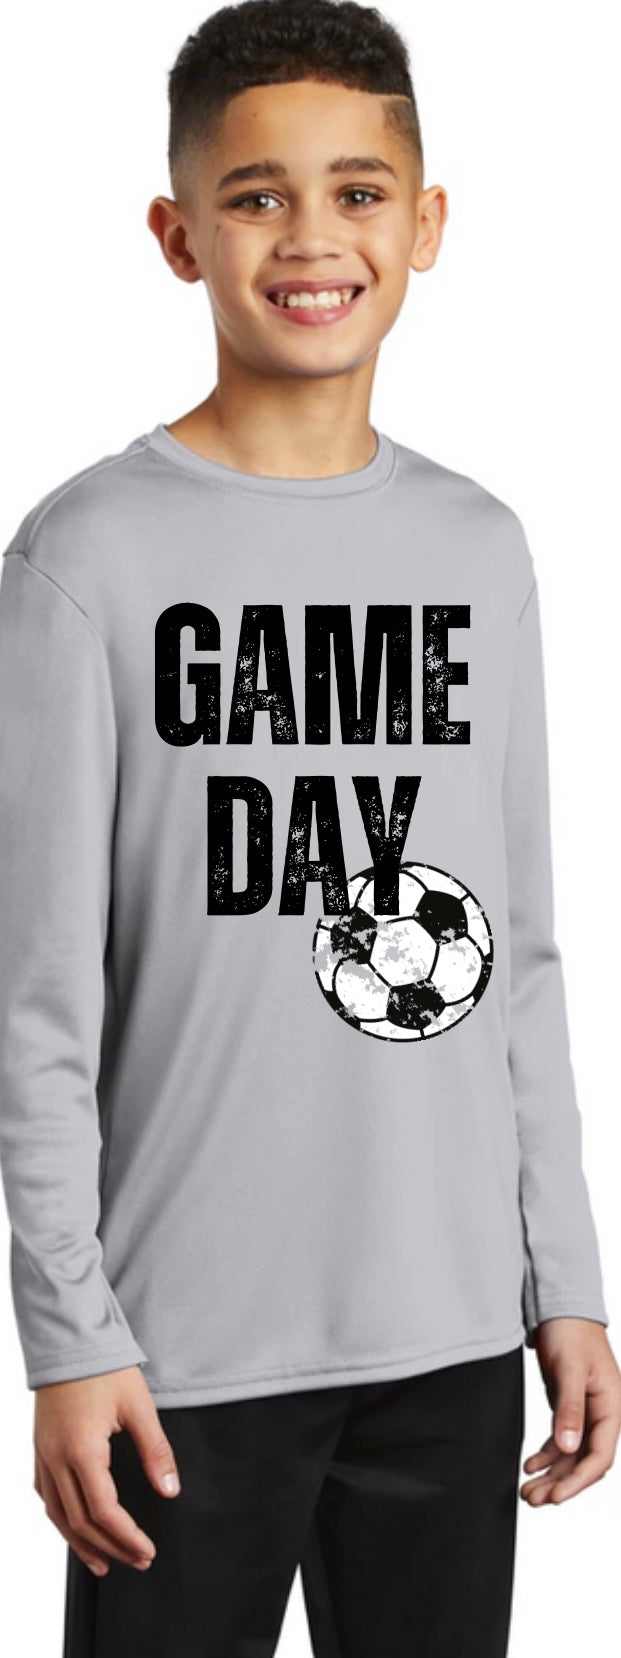 Youth Soccer Dry Fit Game Day Top